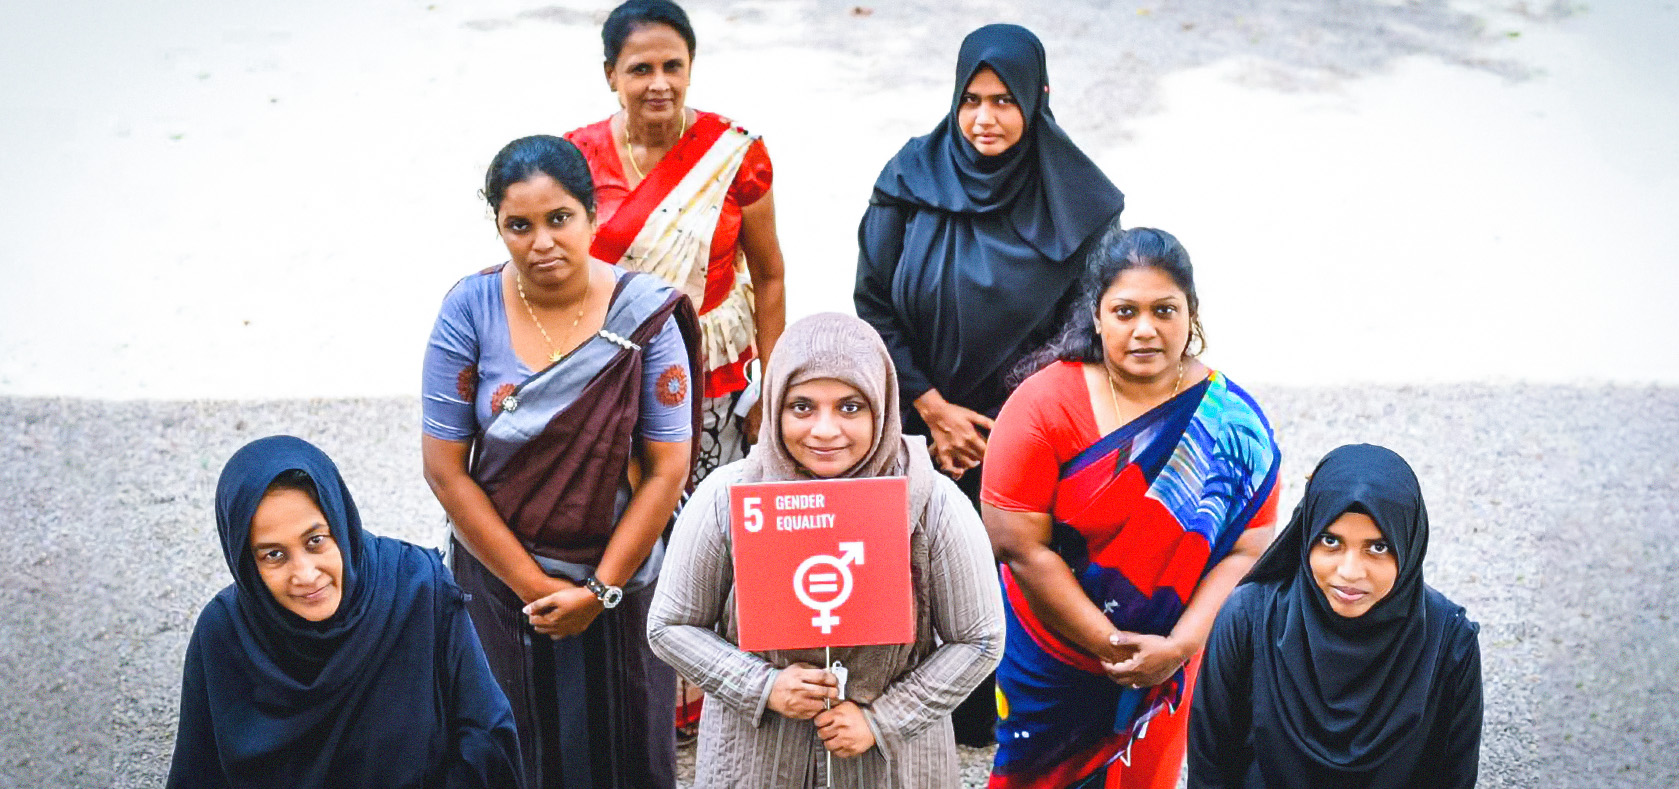 Posing for a group photo are Sri Lankan women community leaders who attended a training that was part of UN Women’s project on promoting women’s leadership in solid waste management. This photo was taken in Puttalam district in April 2021. Photo: UN Women Sri Lanka/Harin Katipearachchi